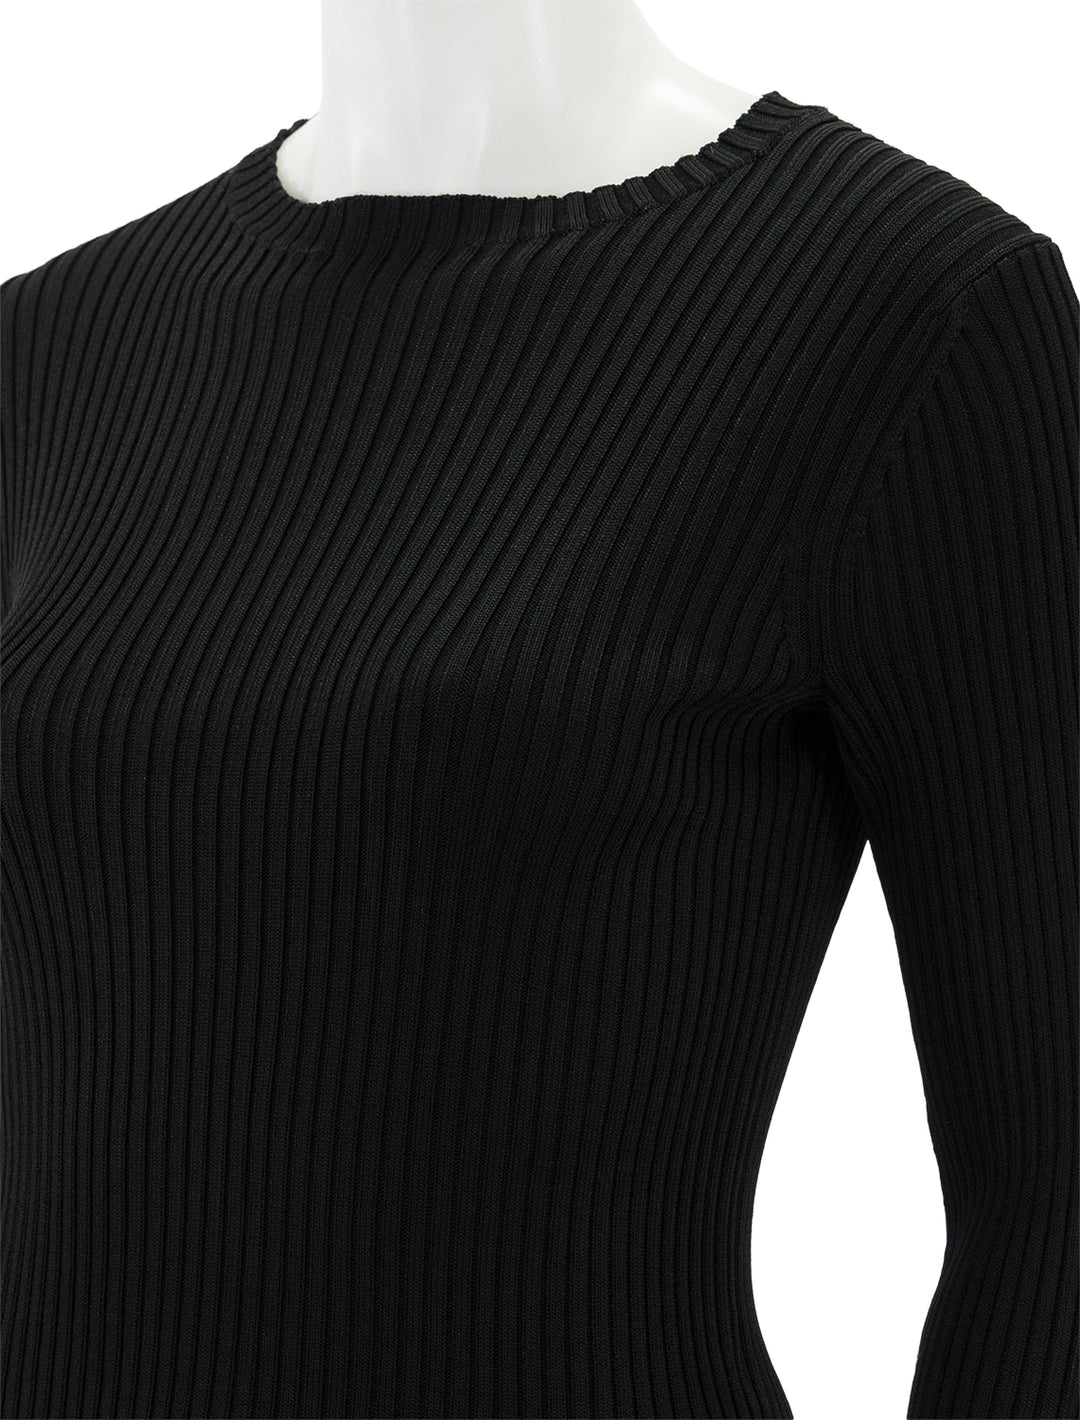 Close-up view of Vince's ribbed boat neck top in black.